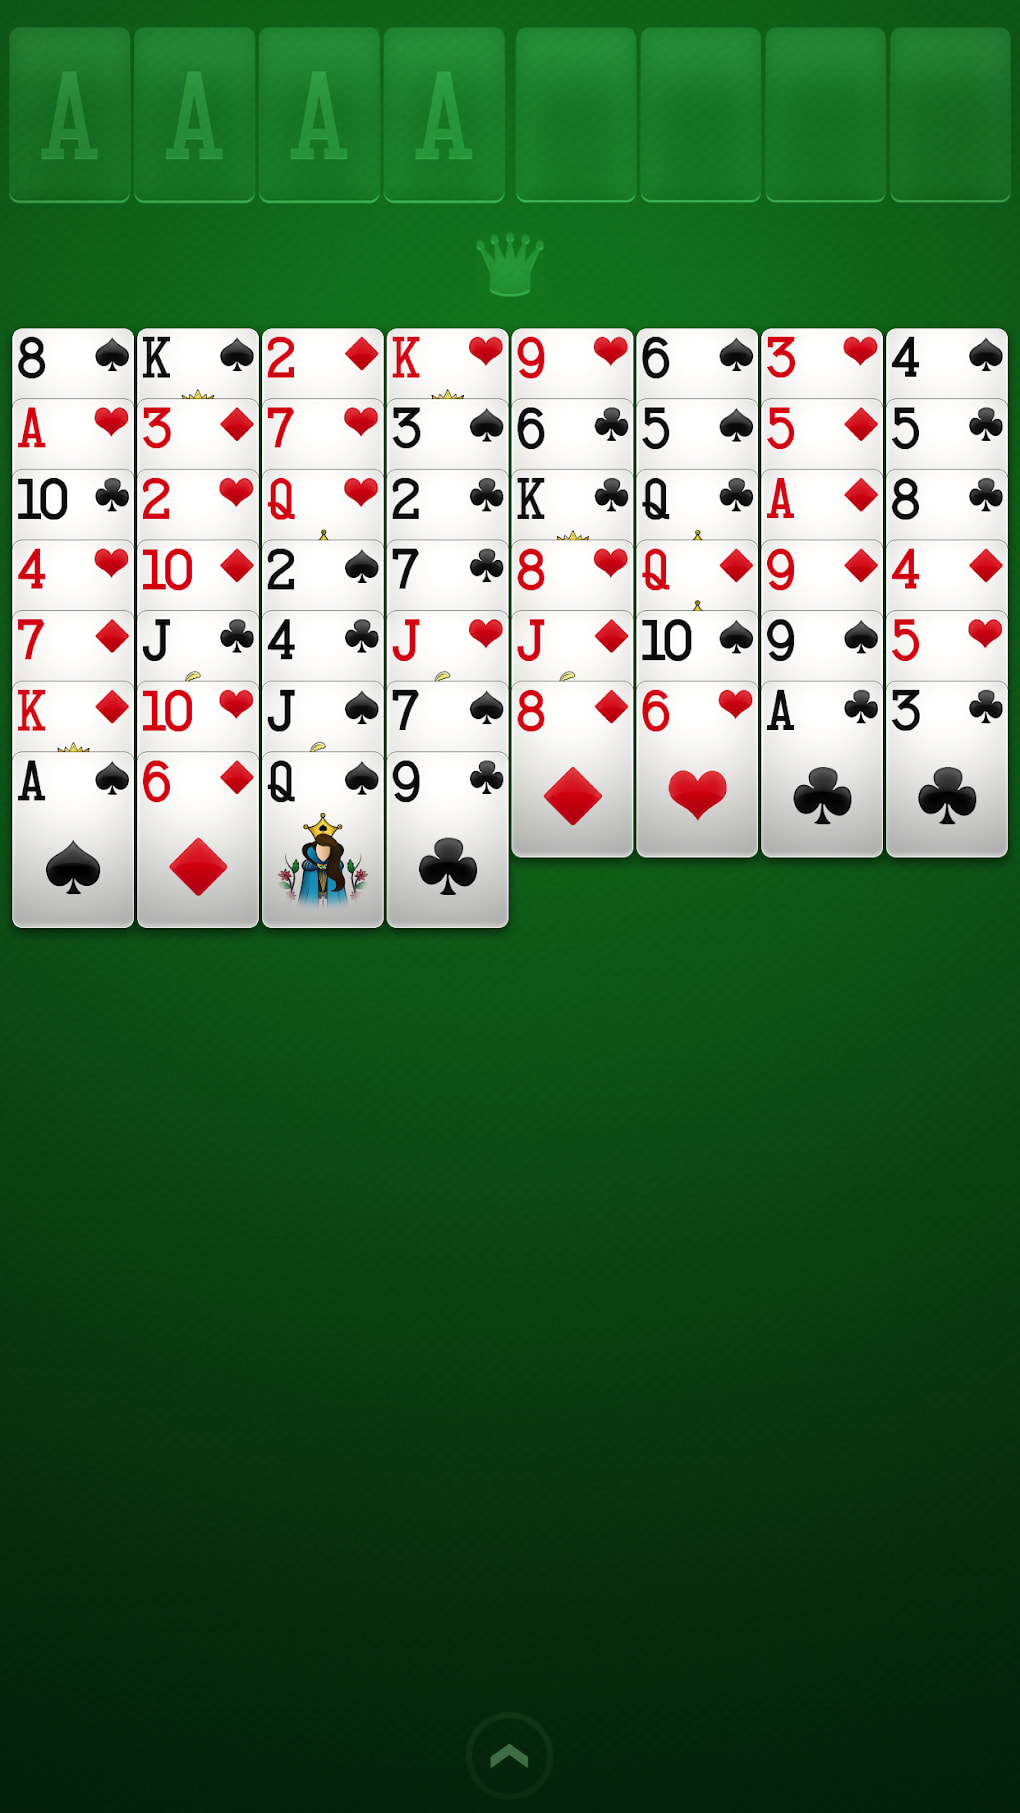 FreeCell Solitaire Card Games para Android - Baixe o APK na Uptodown